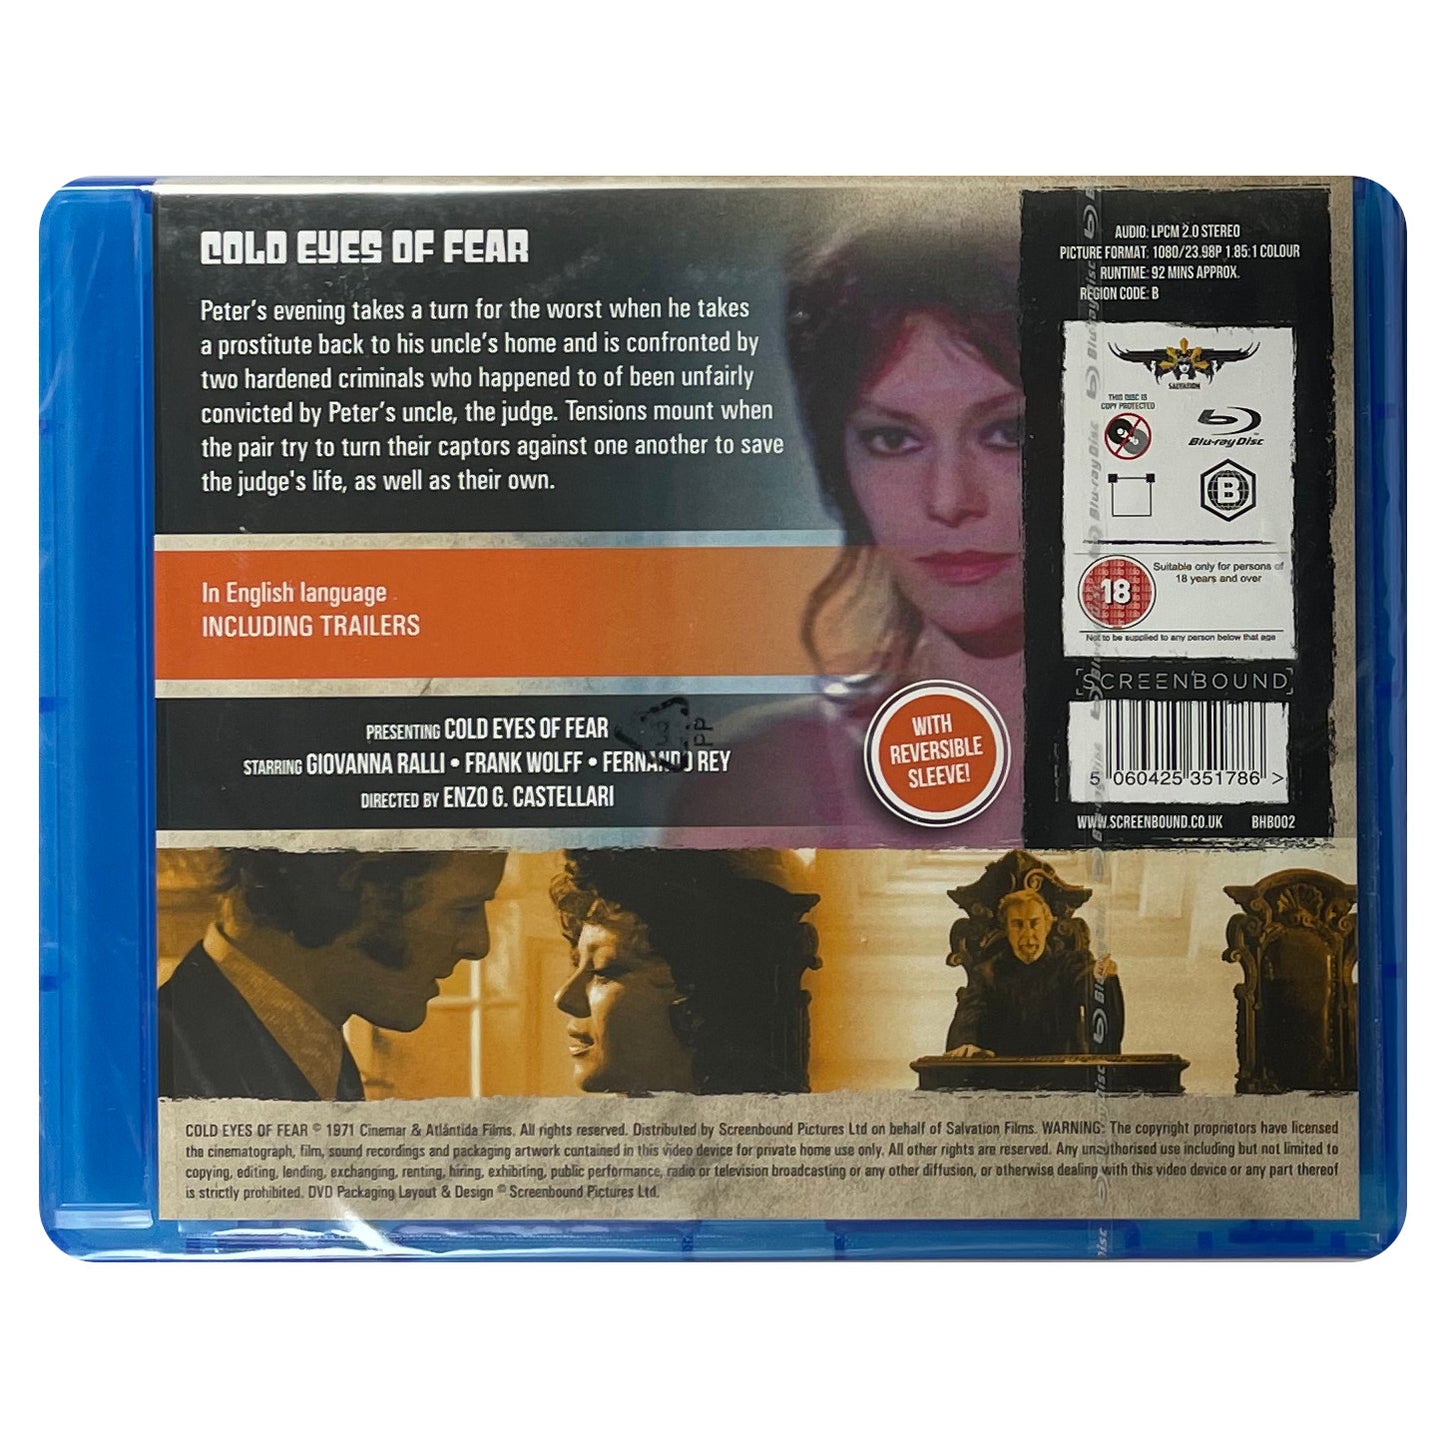 Cold Eyes of Fear Blu-Ray